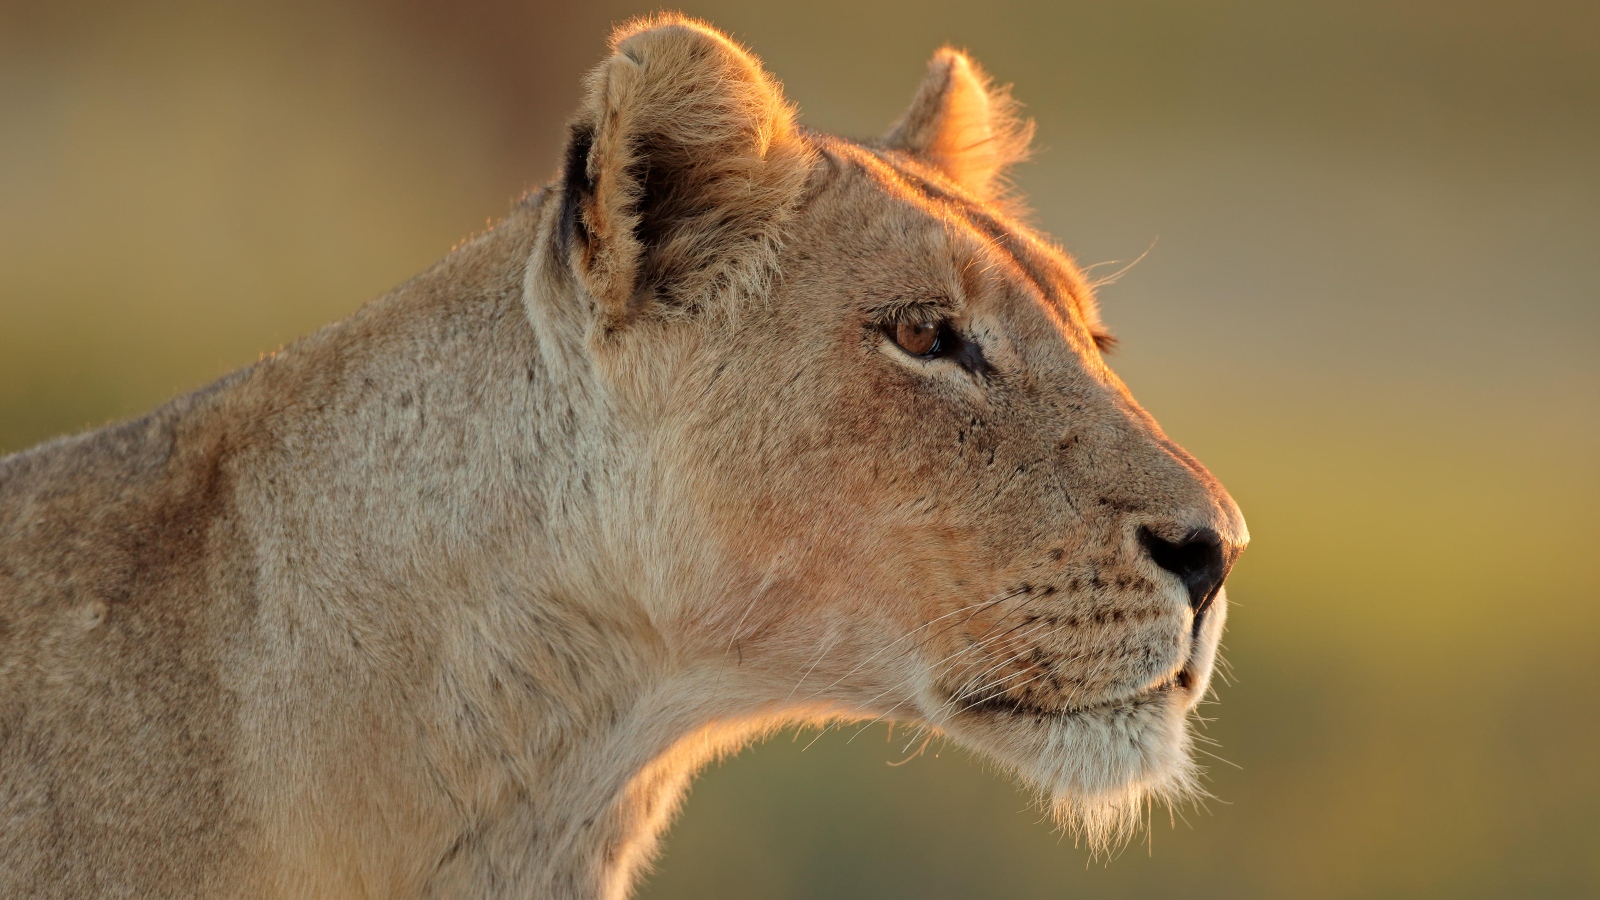 lioness looking ahead as the sun sets